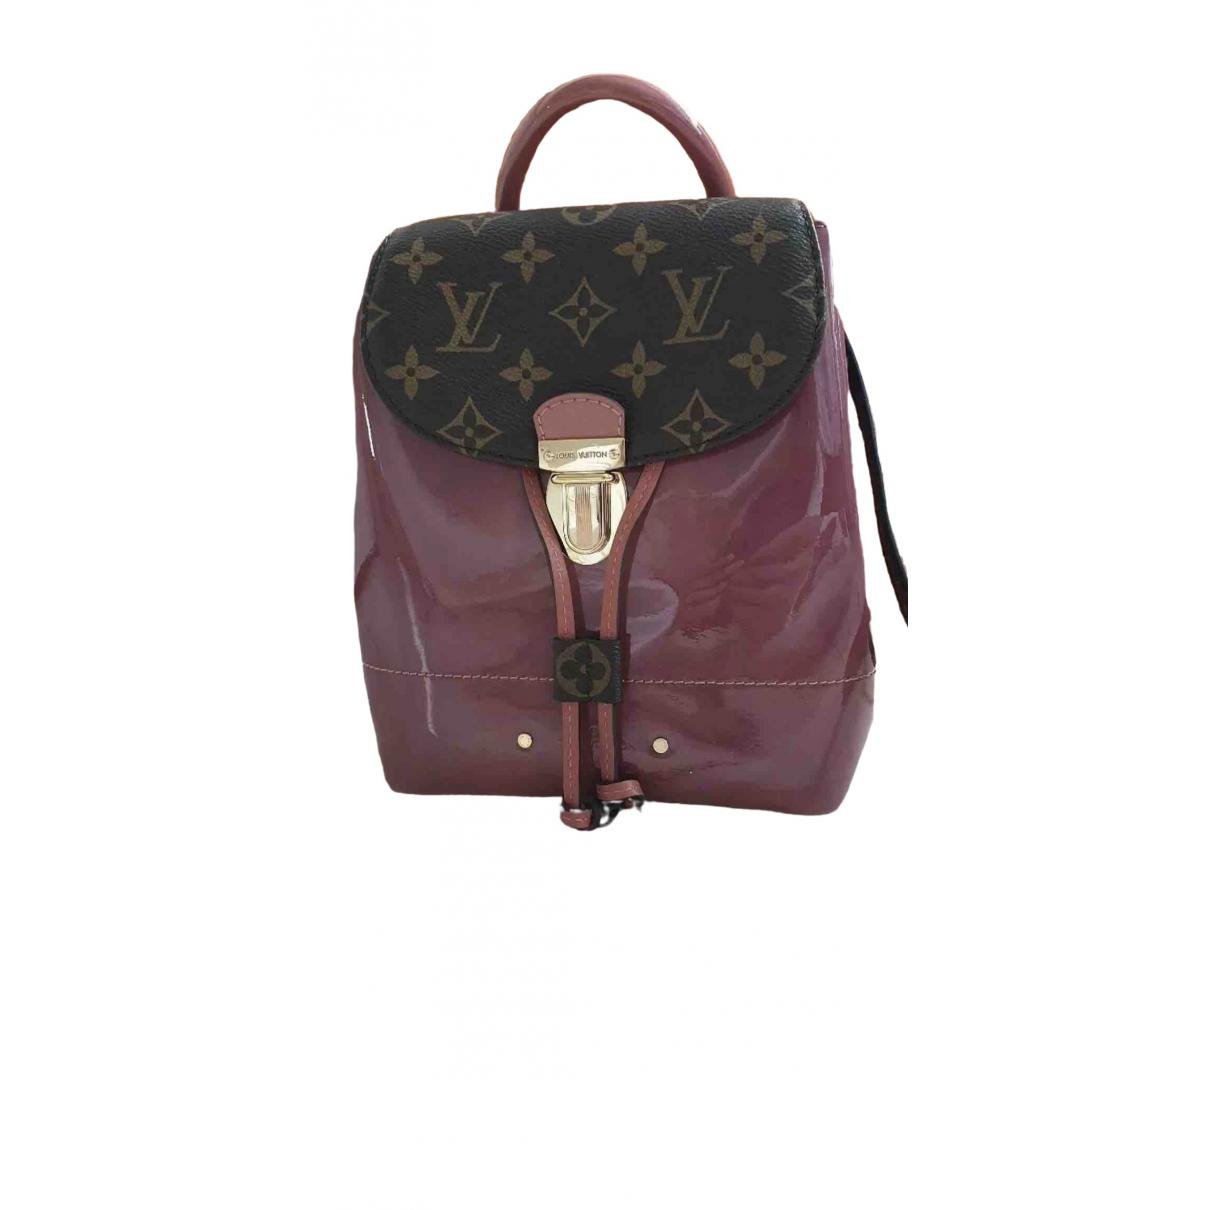 LOUIS VUITTON Monogram Vernis Hot Springs M53545 Backpack from